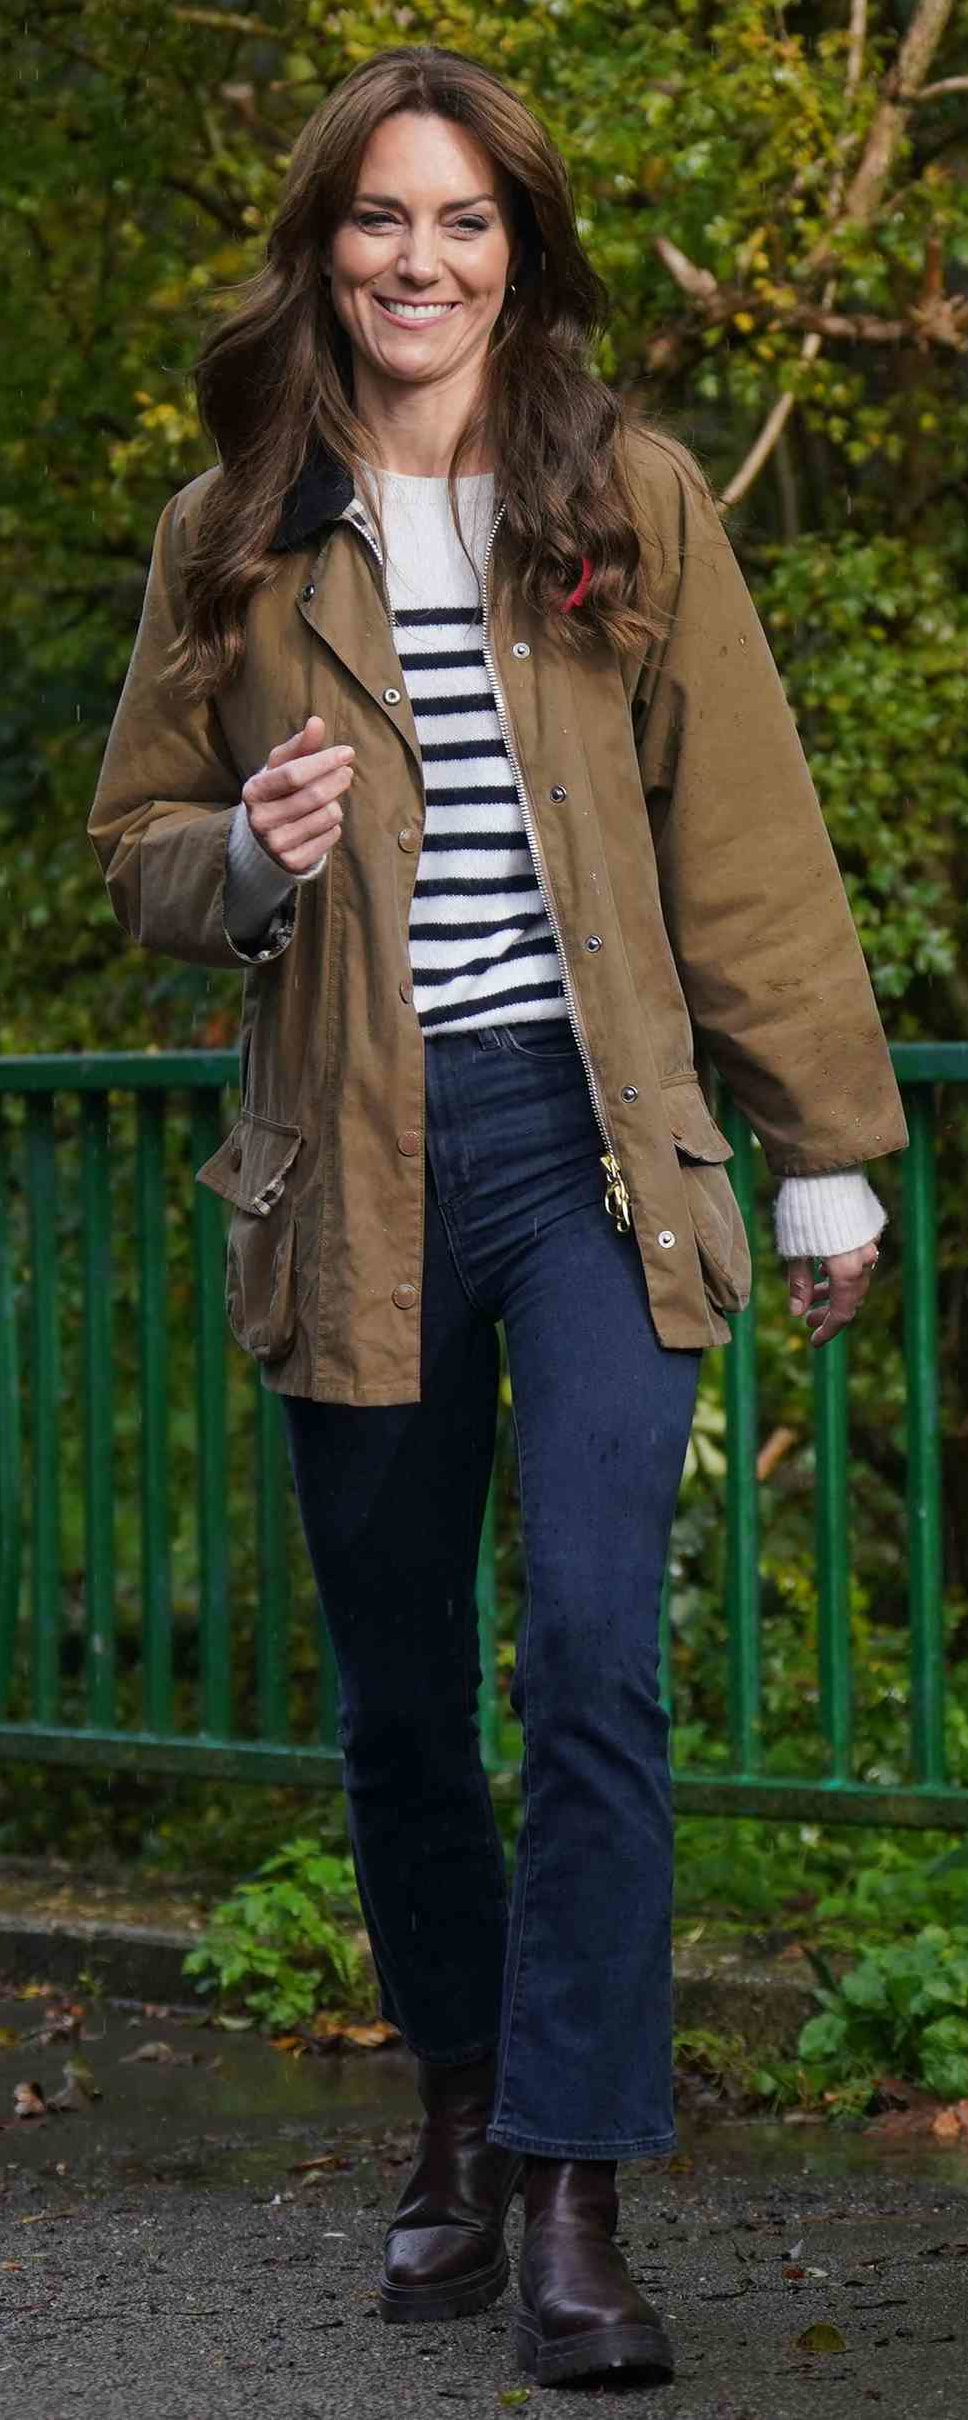 ba&sh 'Coda' Leather Chelsea Boots in Chocolate Brown as seen on Kate Middleton, Princess of Wales.